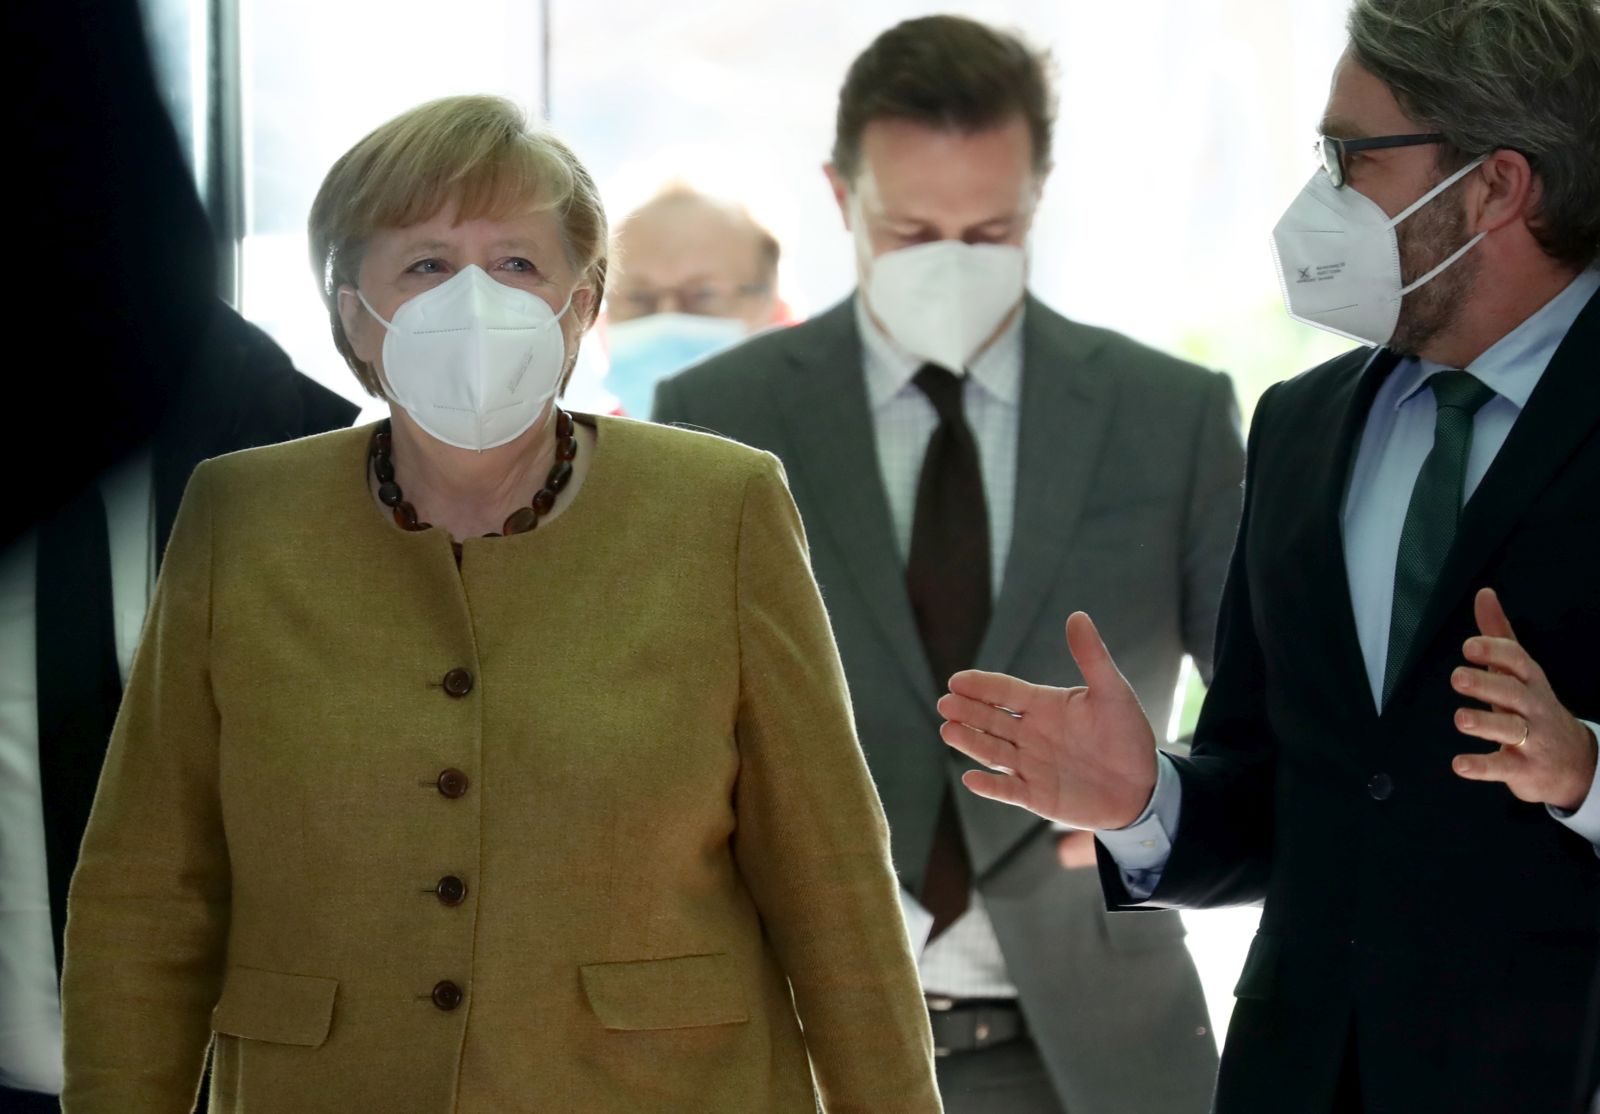 epa08954964 German Chancellor Angela Merkel (L) arrives to a press conference at the Federal Press Conference (Bundespressekonferenz) in Berlin, Germany, 21 January 2021.  EPA/HAYOUNG JEON